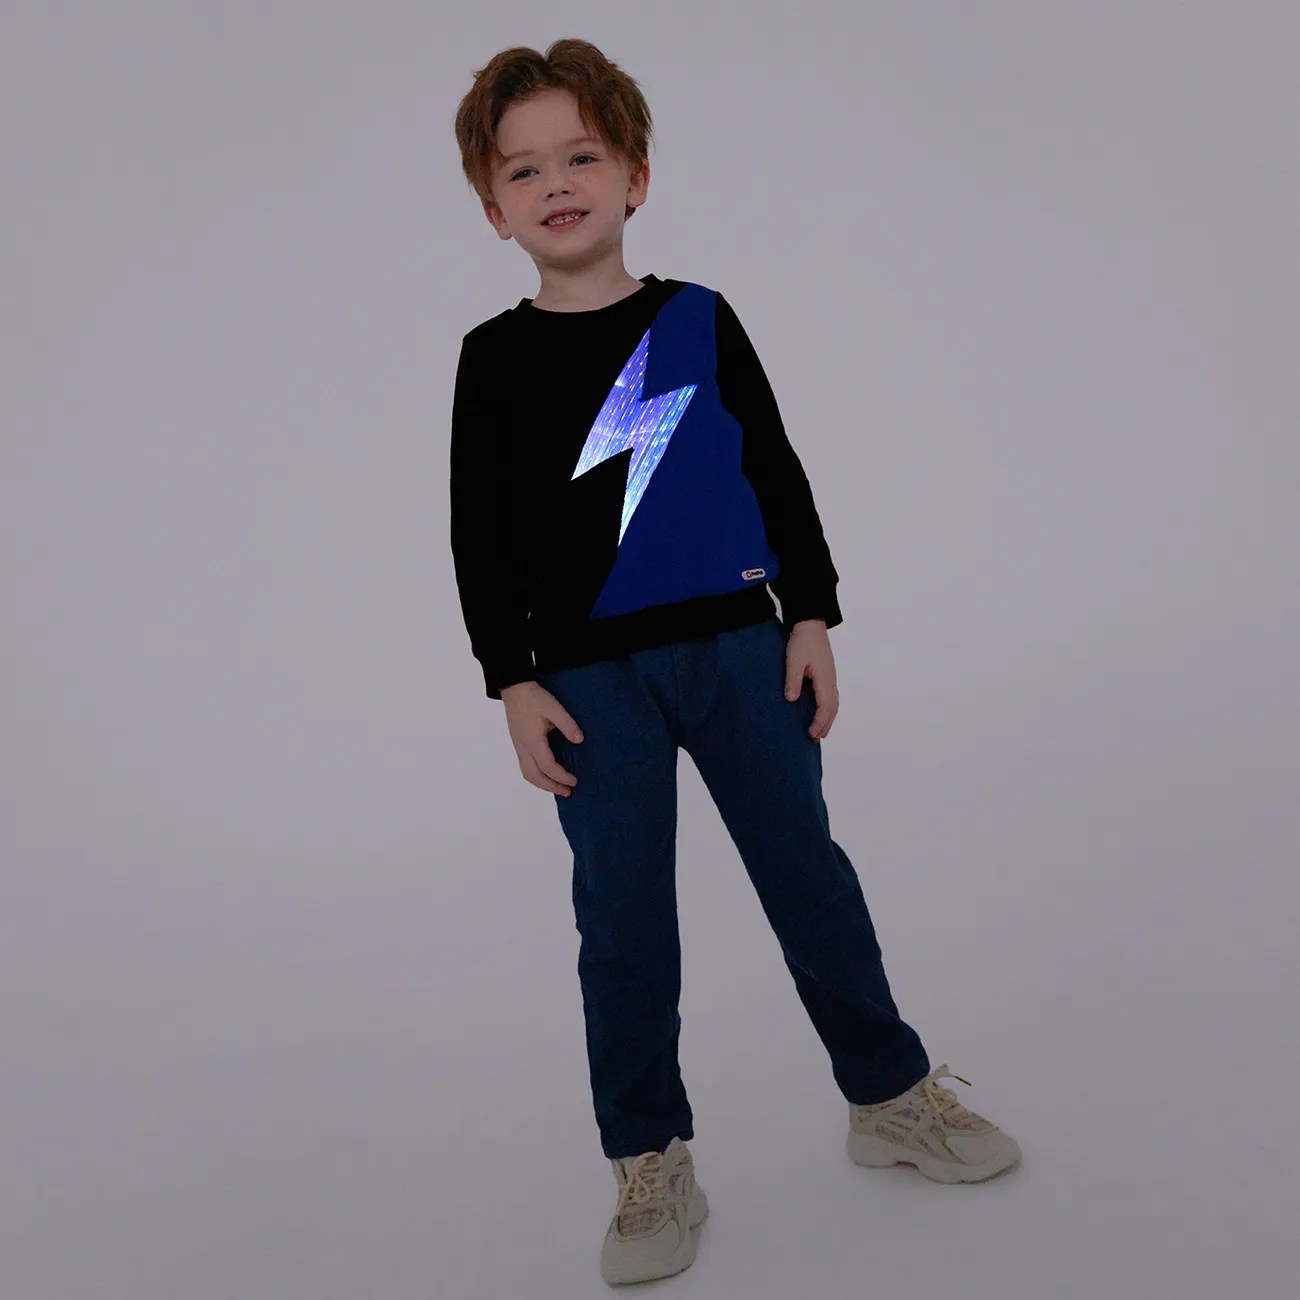 Go-Glow Illuminating Sweatshirt with Light Up Color Blocking Lightning Pattern Including Controller (Built-In Battery) ColorBlock big image 1